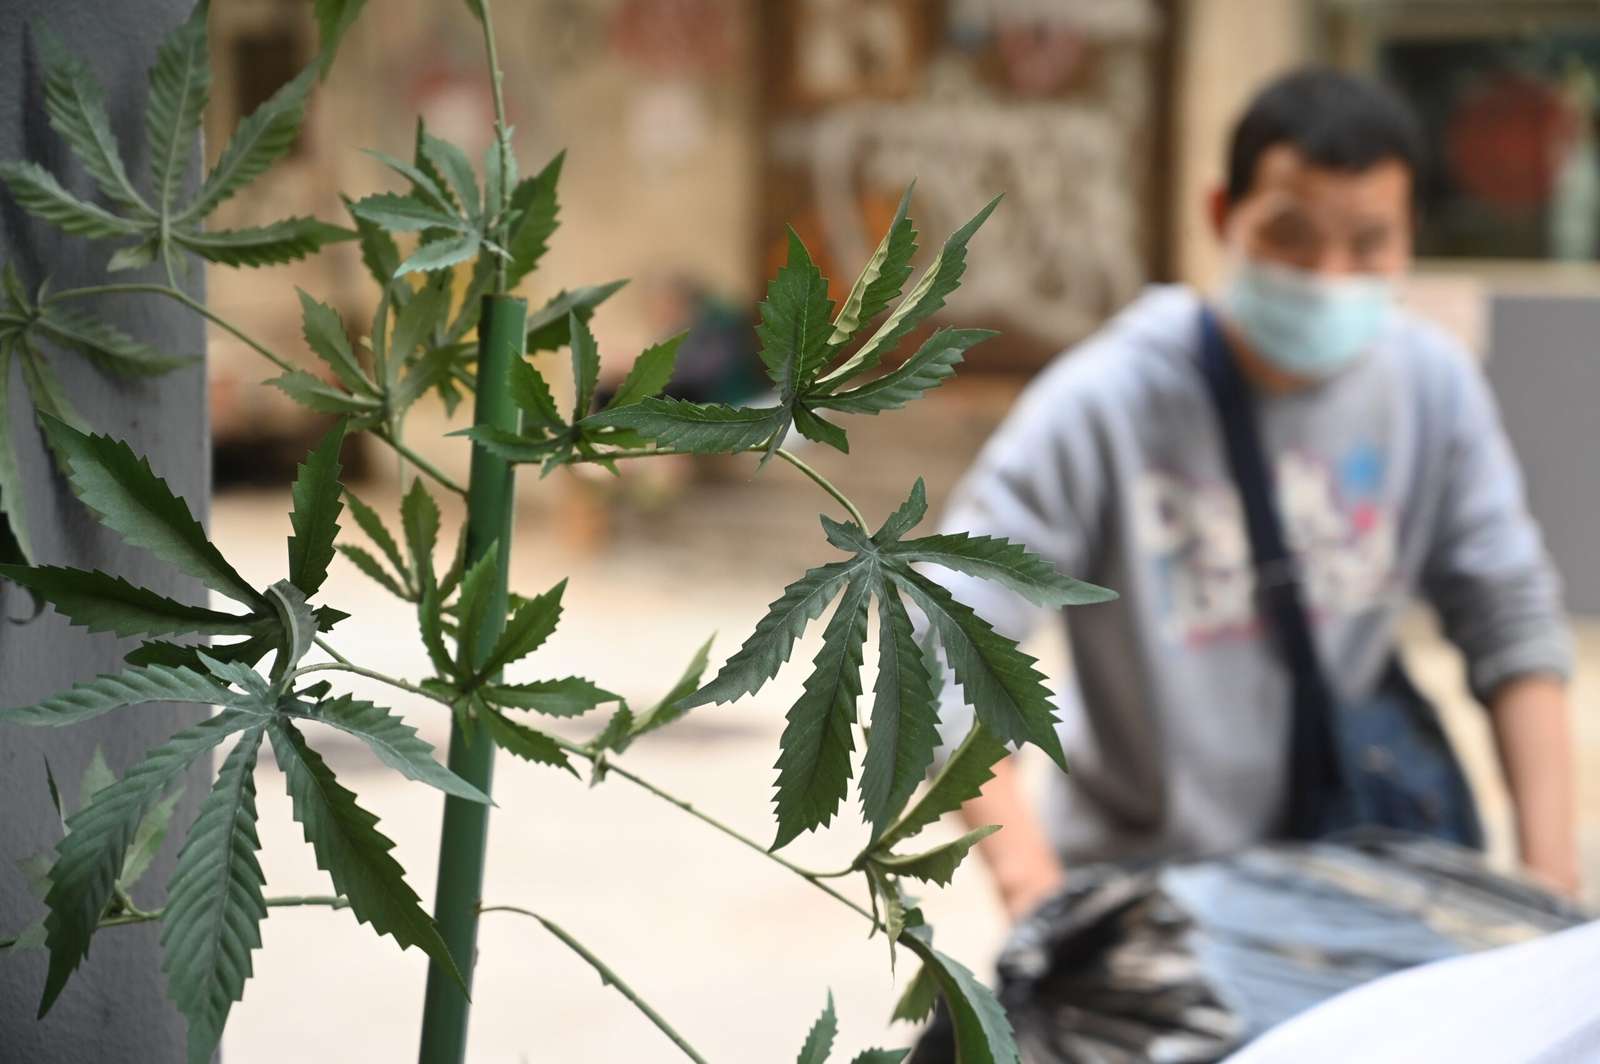 A man passes by imitation cannabis plants outside a business who used to sell cannabidiol products in Hong Kong on February 1, 2023. - A new law criminalising the possession, consumption and selling of cannabidiol (CBD) in Hong Kong came into effect on February 1, placing the substance on par with heroin in terms of legal classification. (Photo by Peter PARKS / AFP)